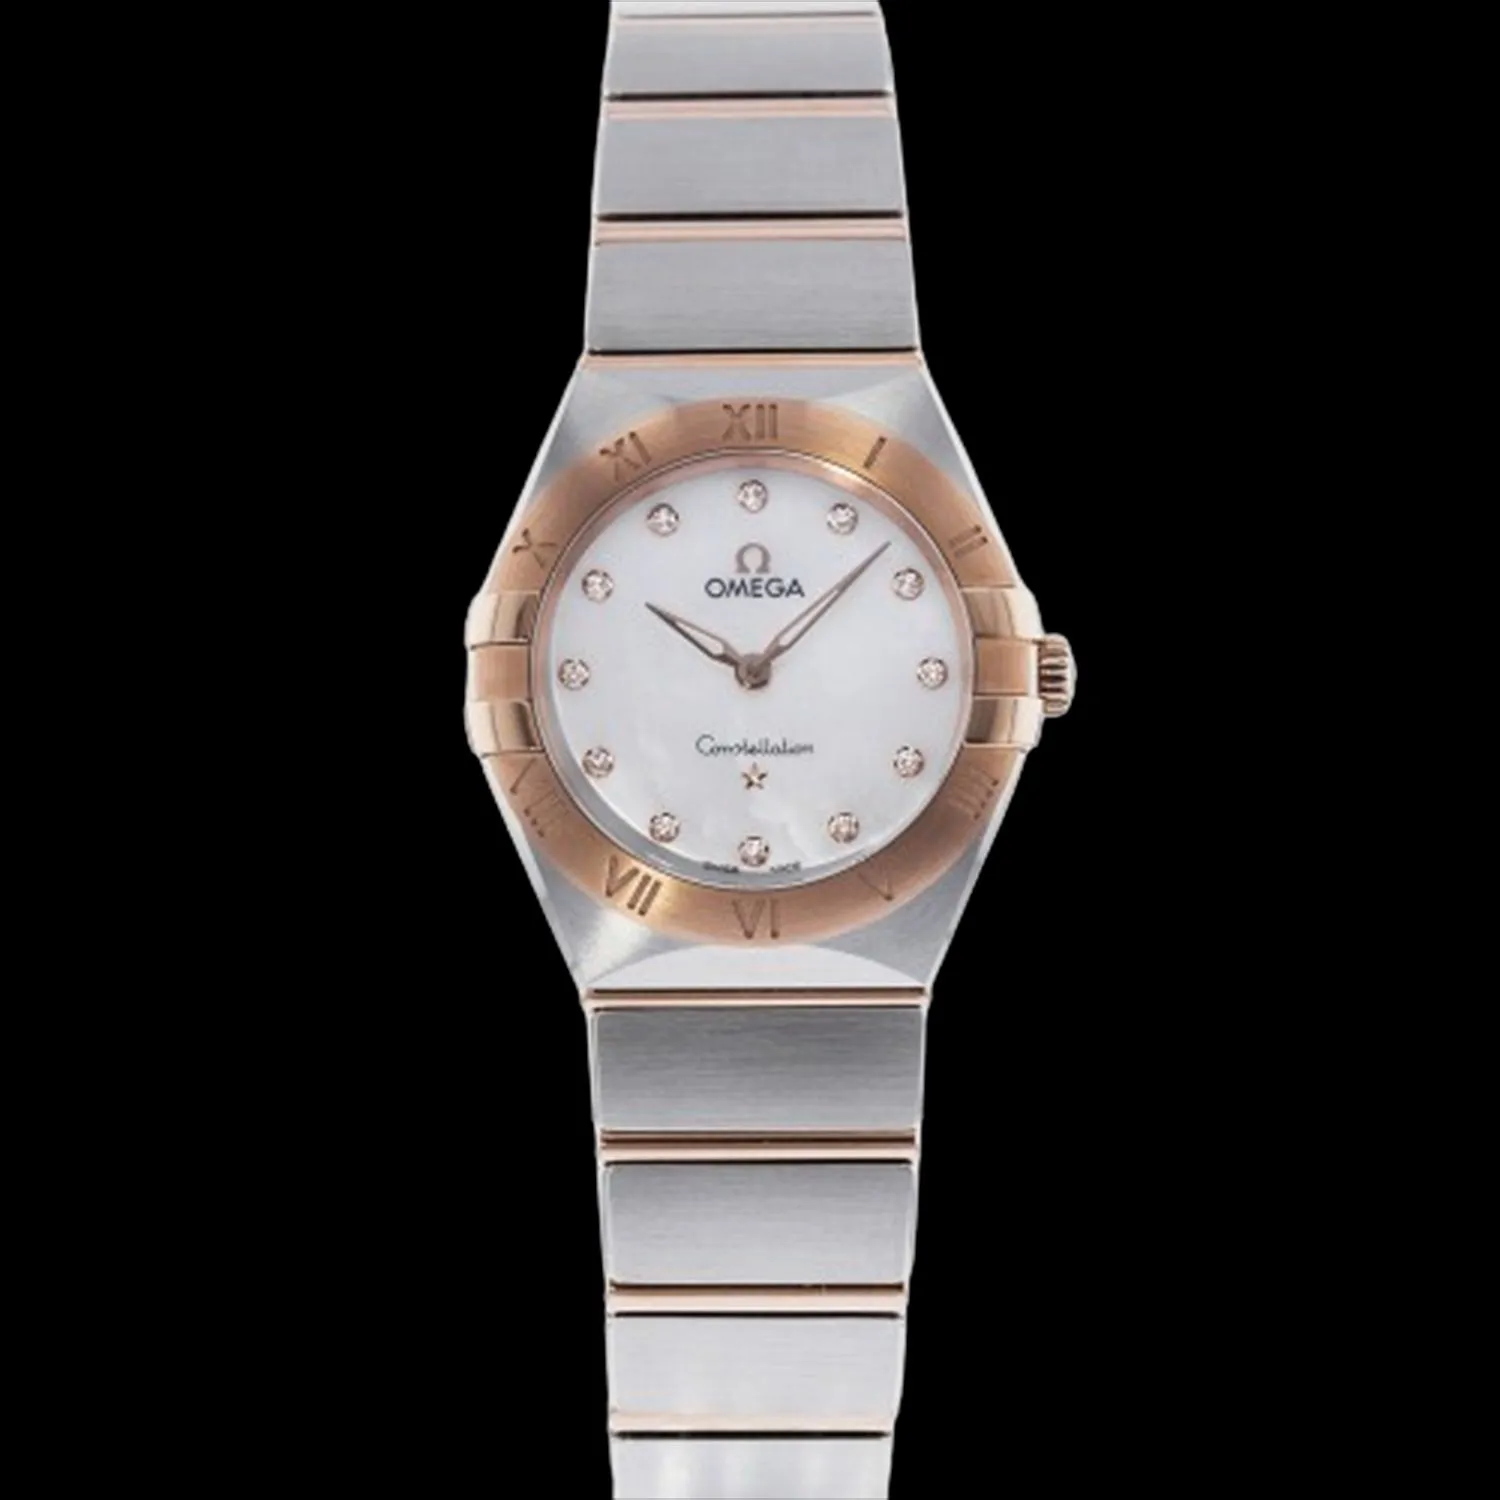 Omega Constellation Manhattan 28mm Rose gold and stainless steel